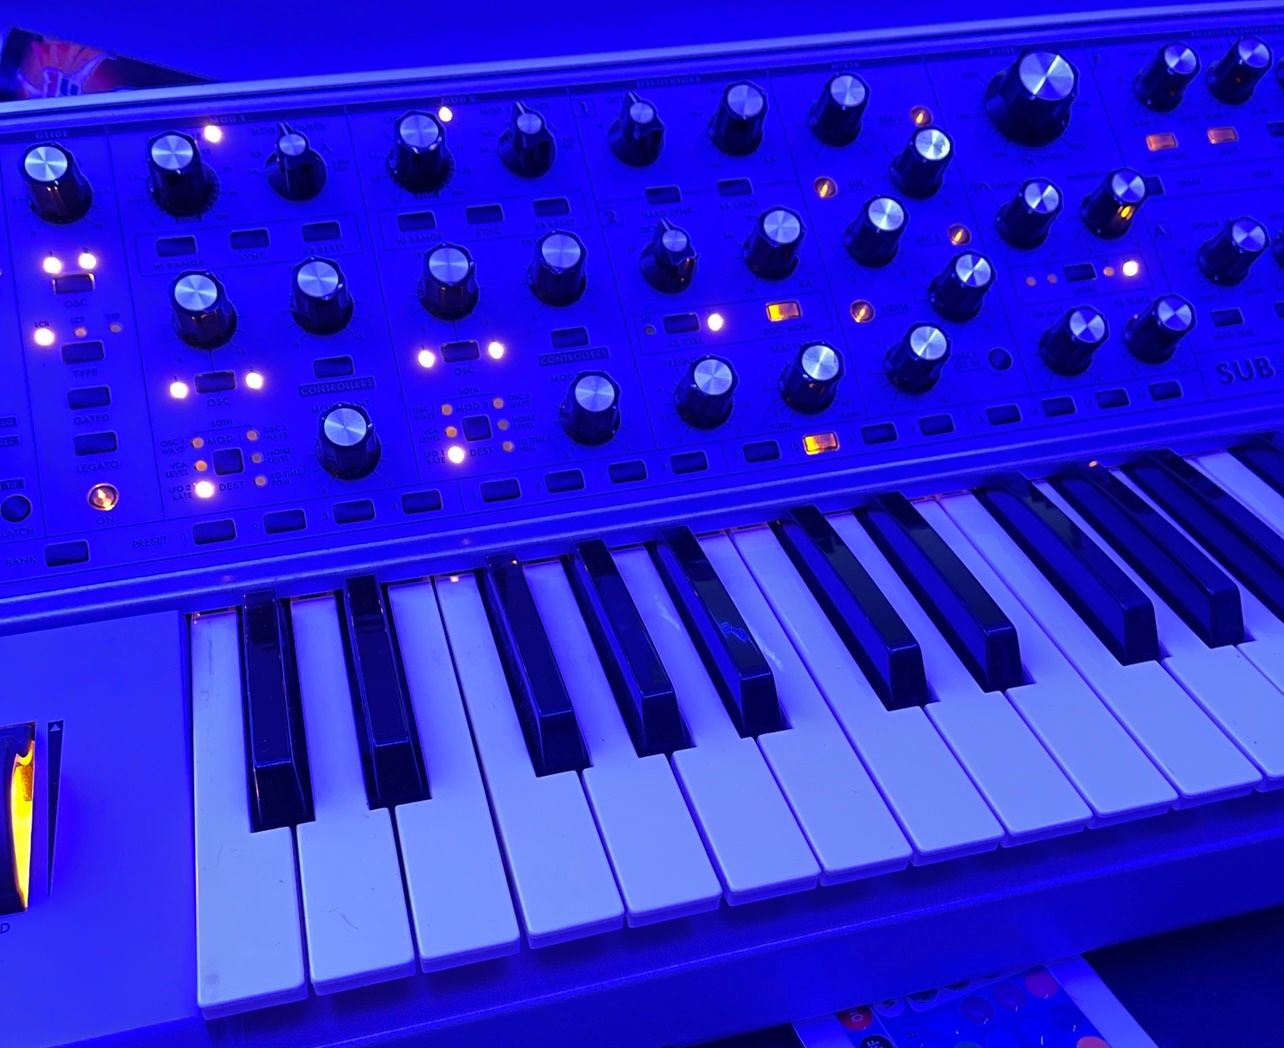 How Percussive Synth came about